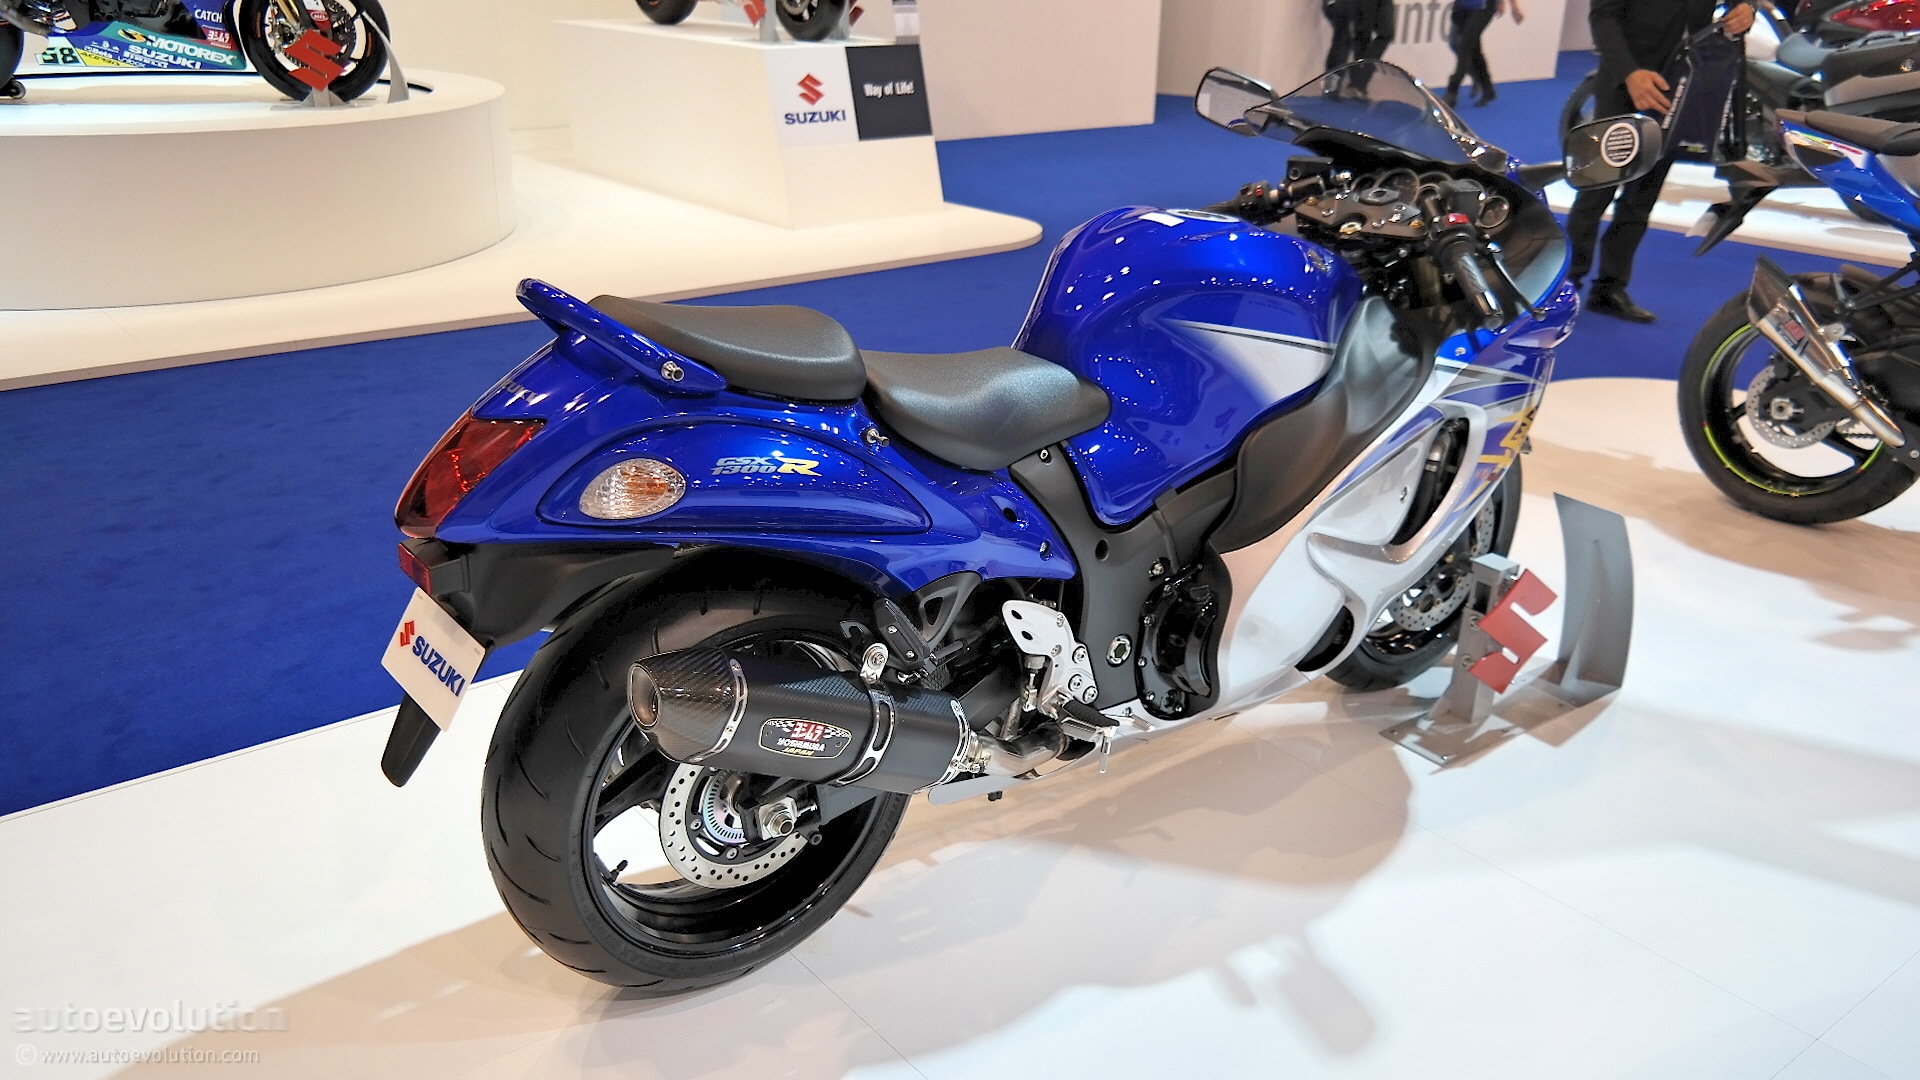 What are some features of the Suzuki Hayabusa GSX1300R?